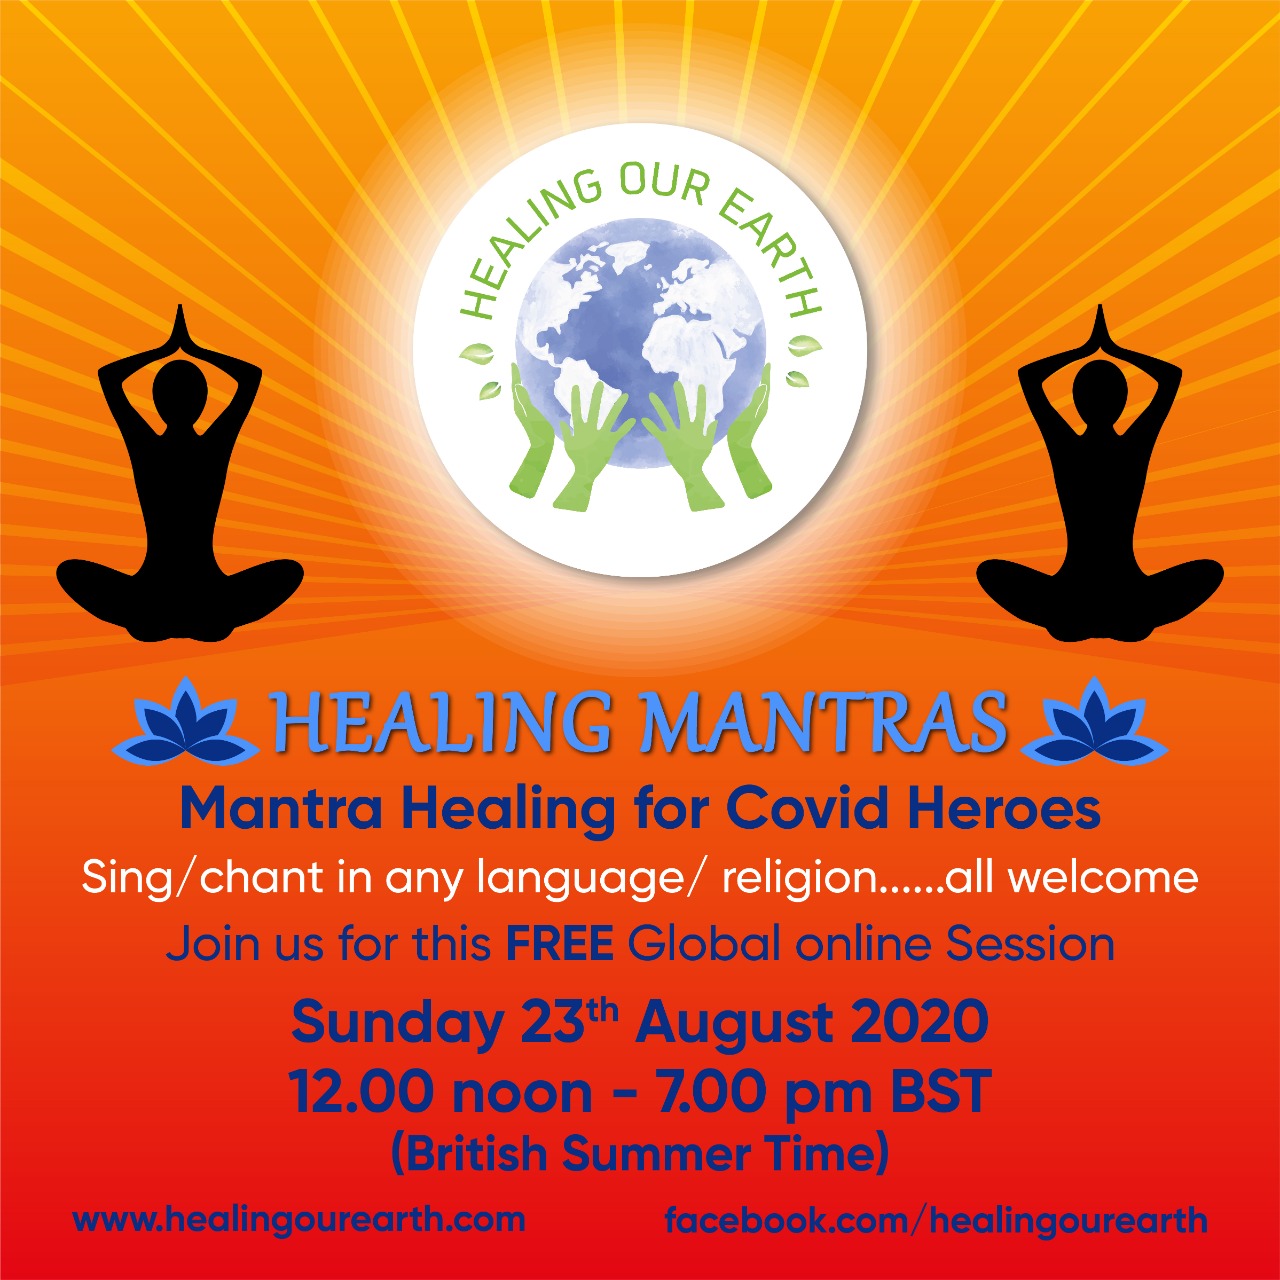 Mantra Healing fror Covid Heroes - 23rd Aug 2020 - 12noon to 7pm